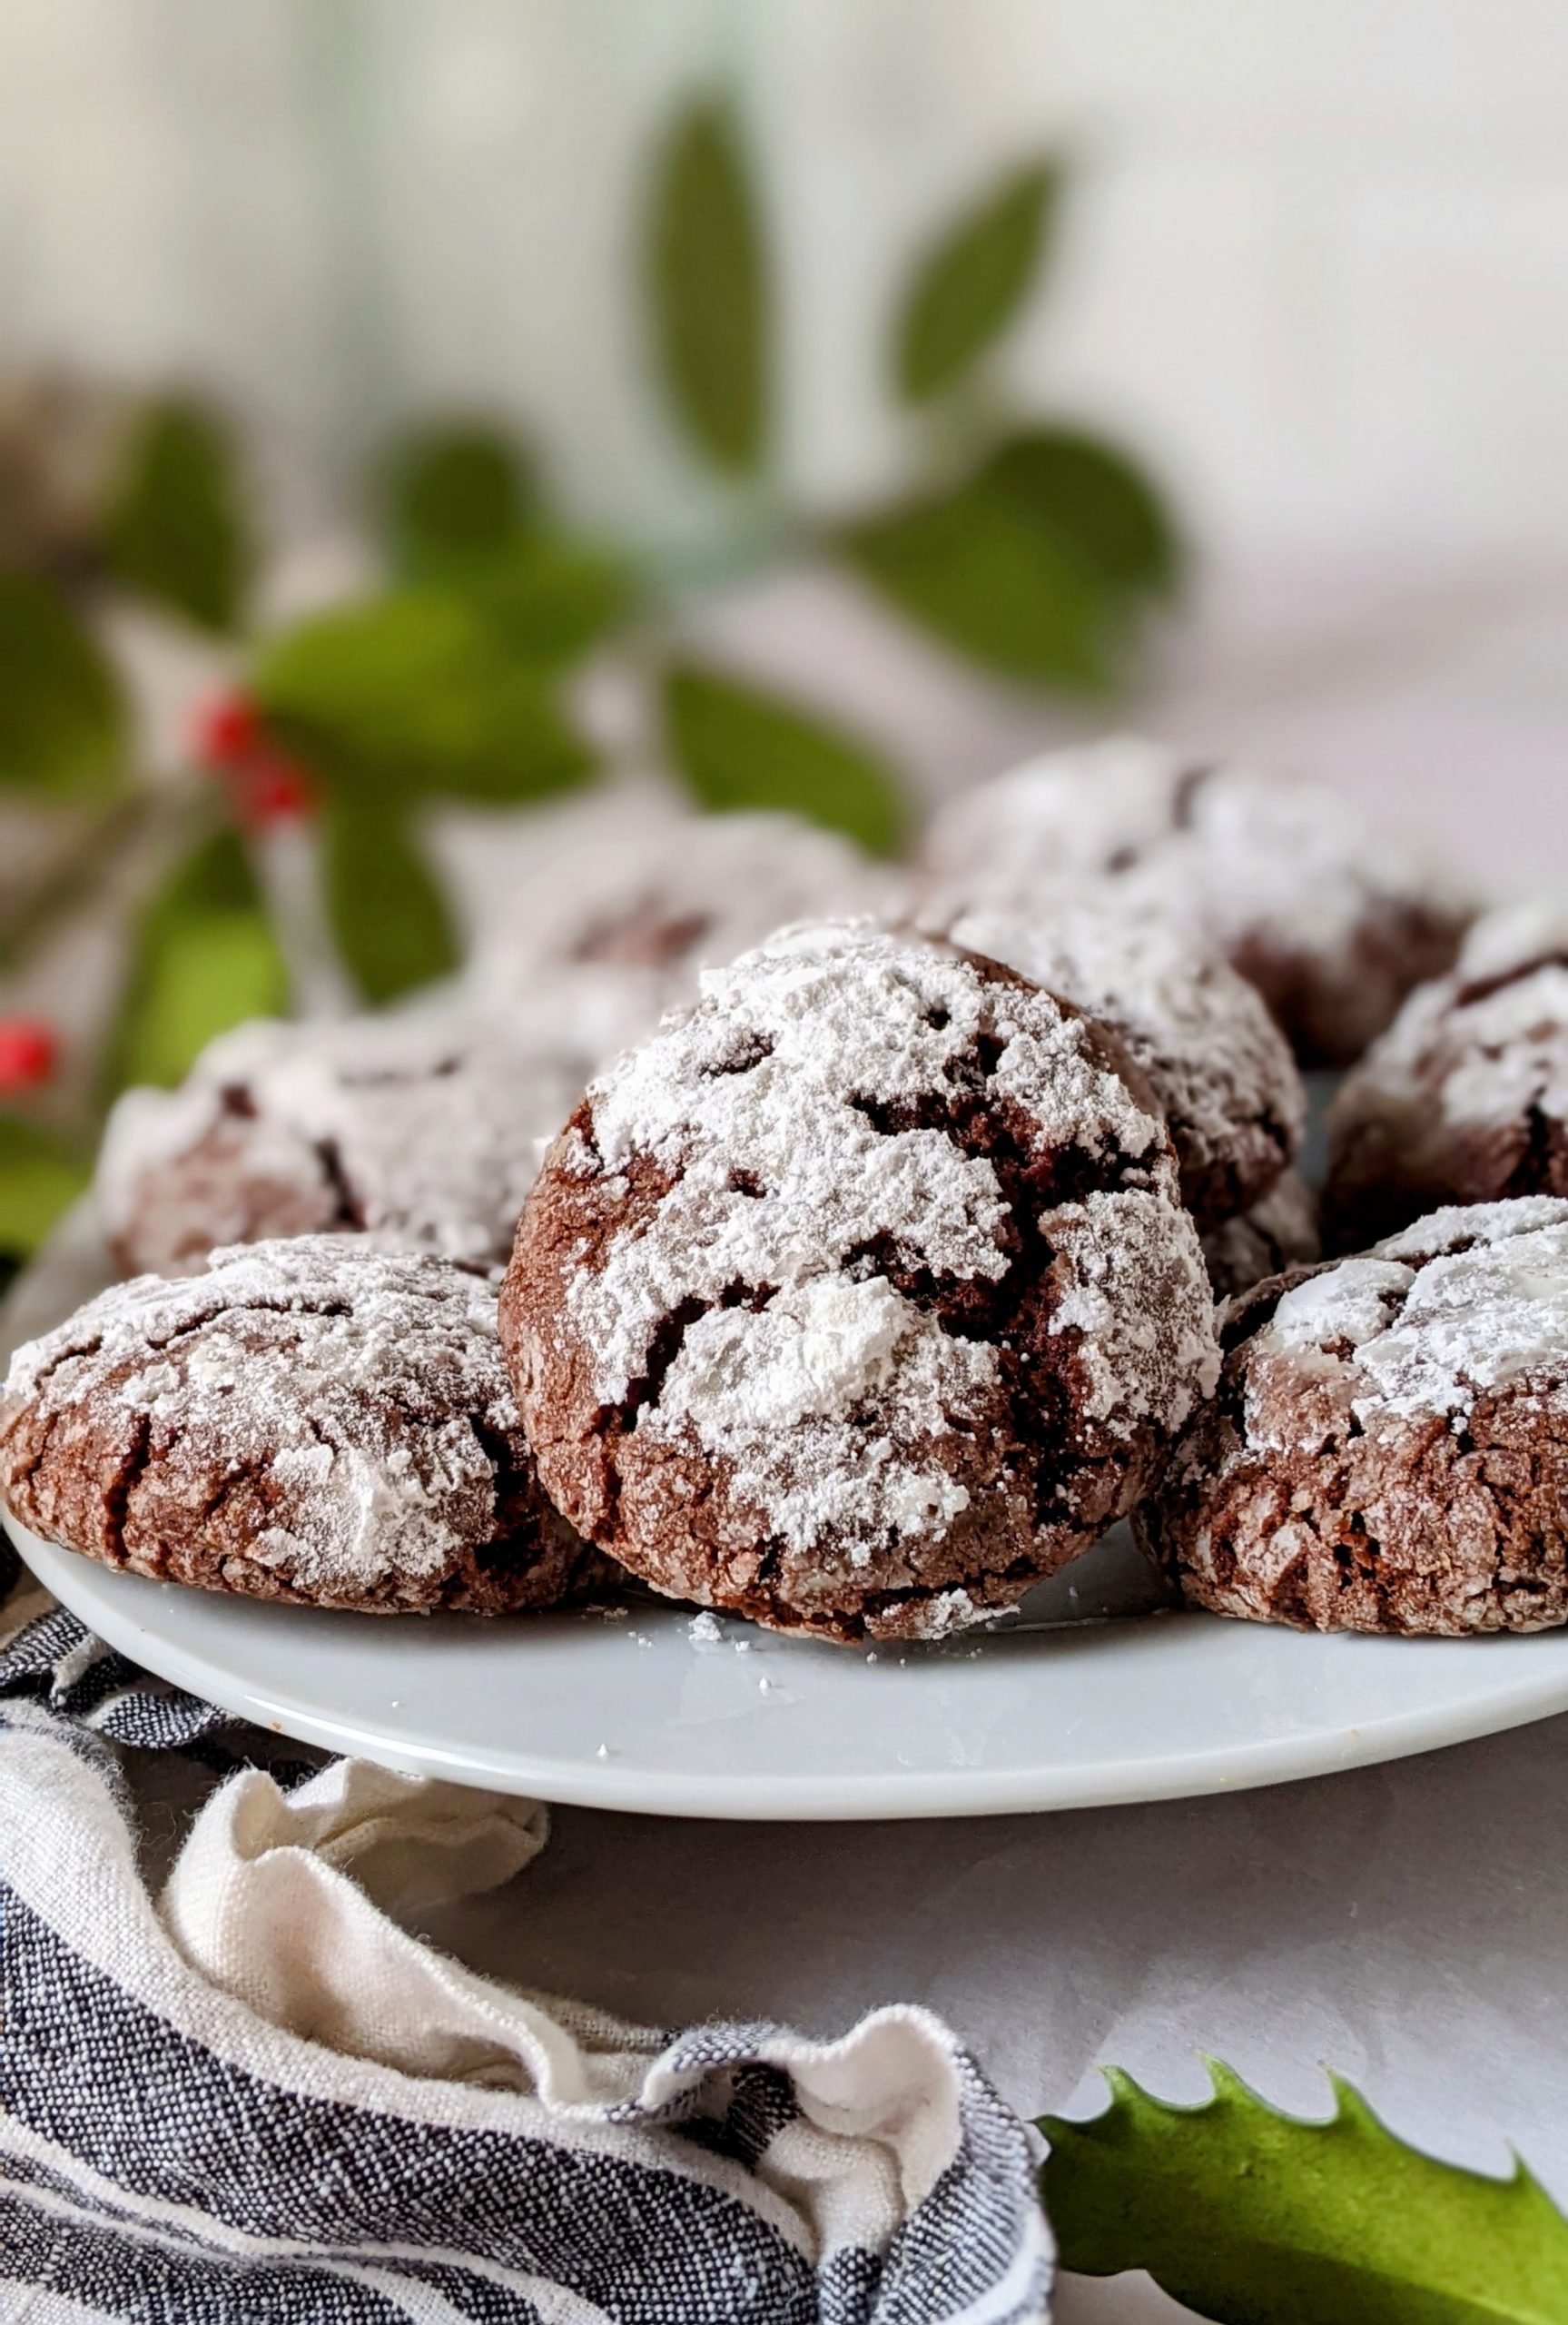 dairy free crinkle cookies chocolate whole wheat christmas cookies recipe holiday baking without eggs no dairy cookies vegan crinkle cookies